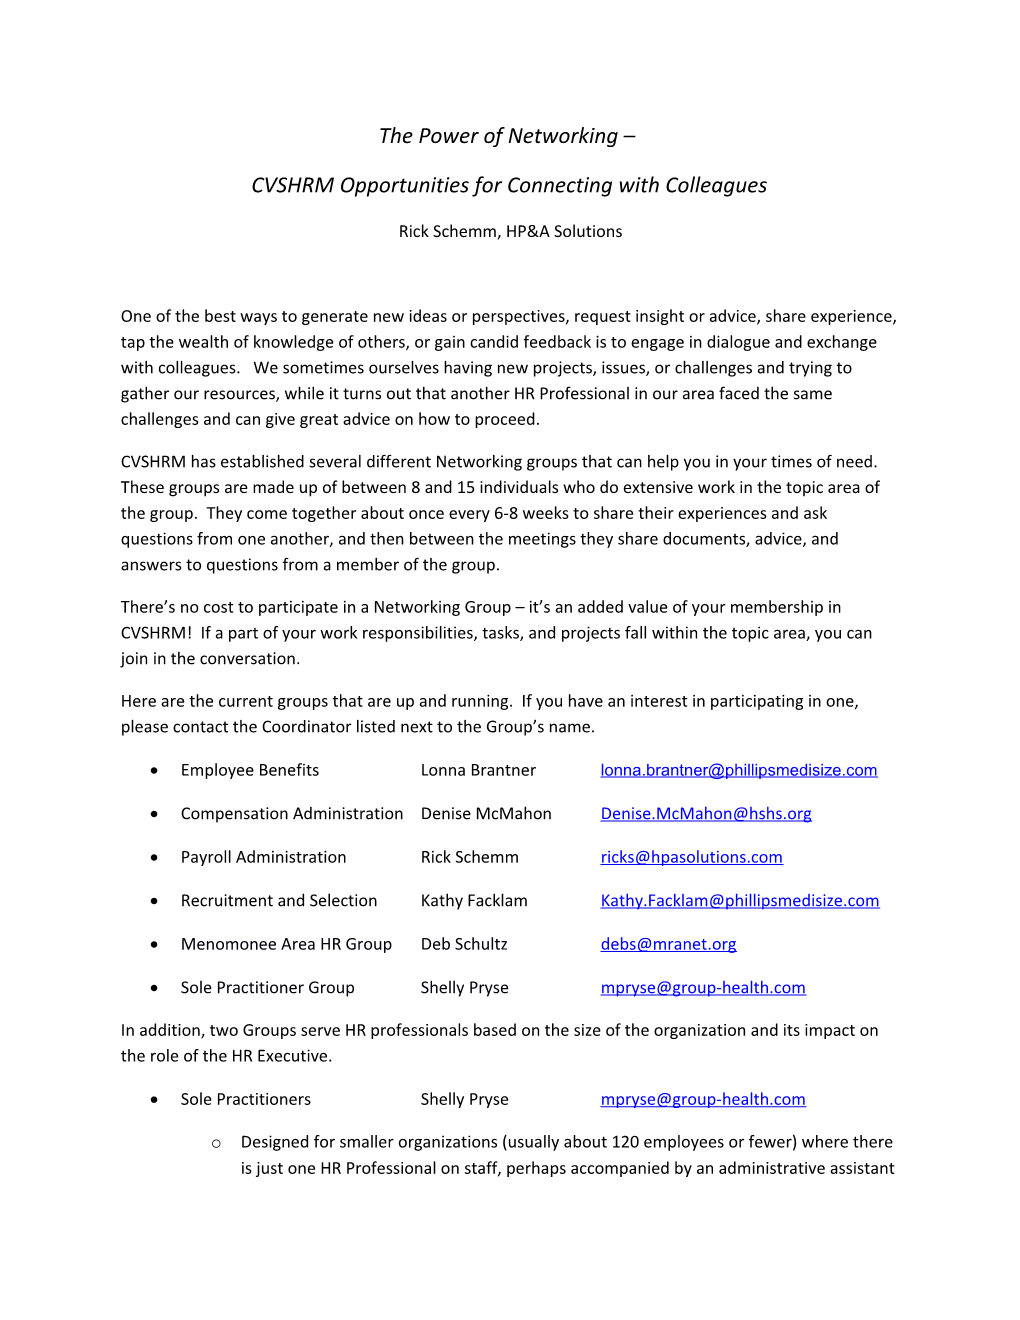 CVSHRM Opportunities for Connecting with Colleagues